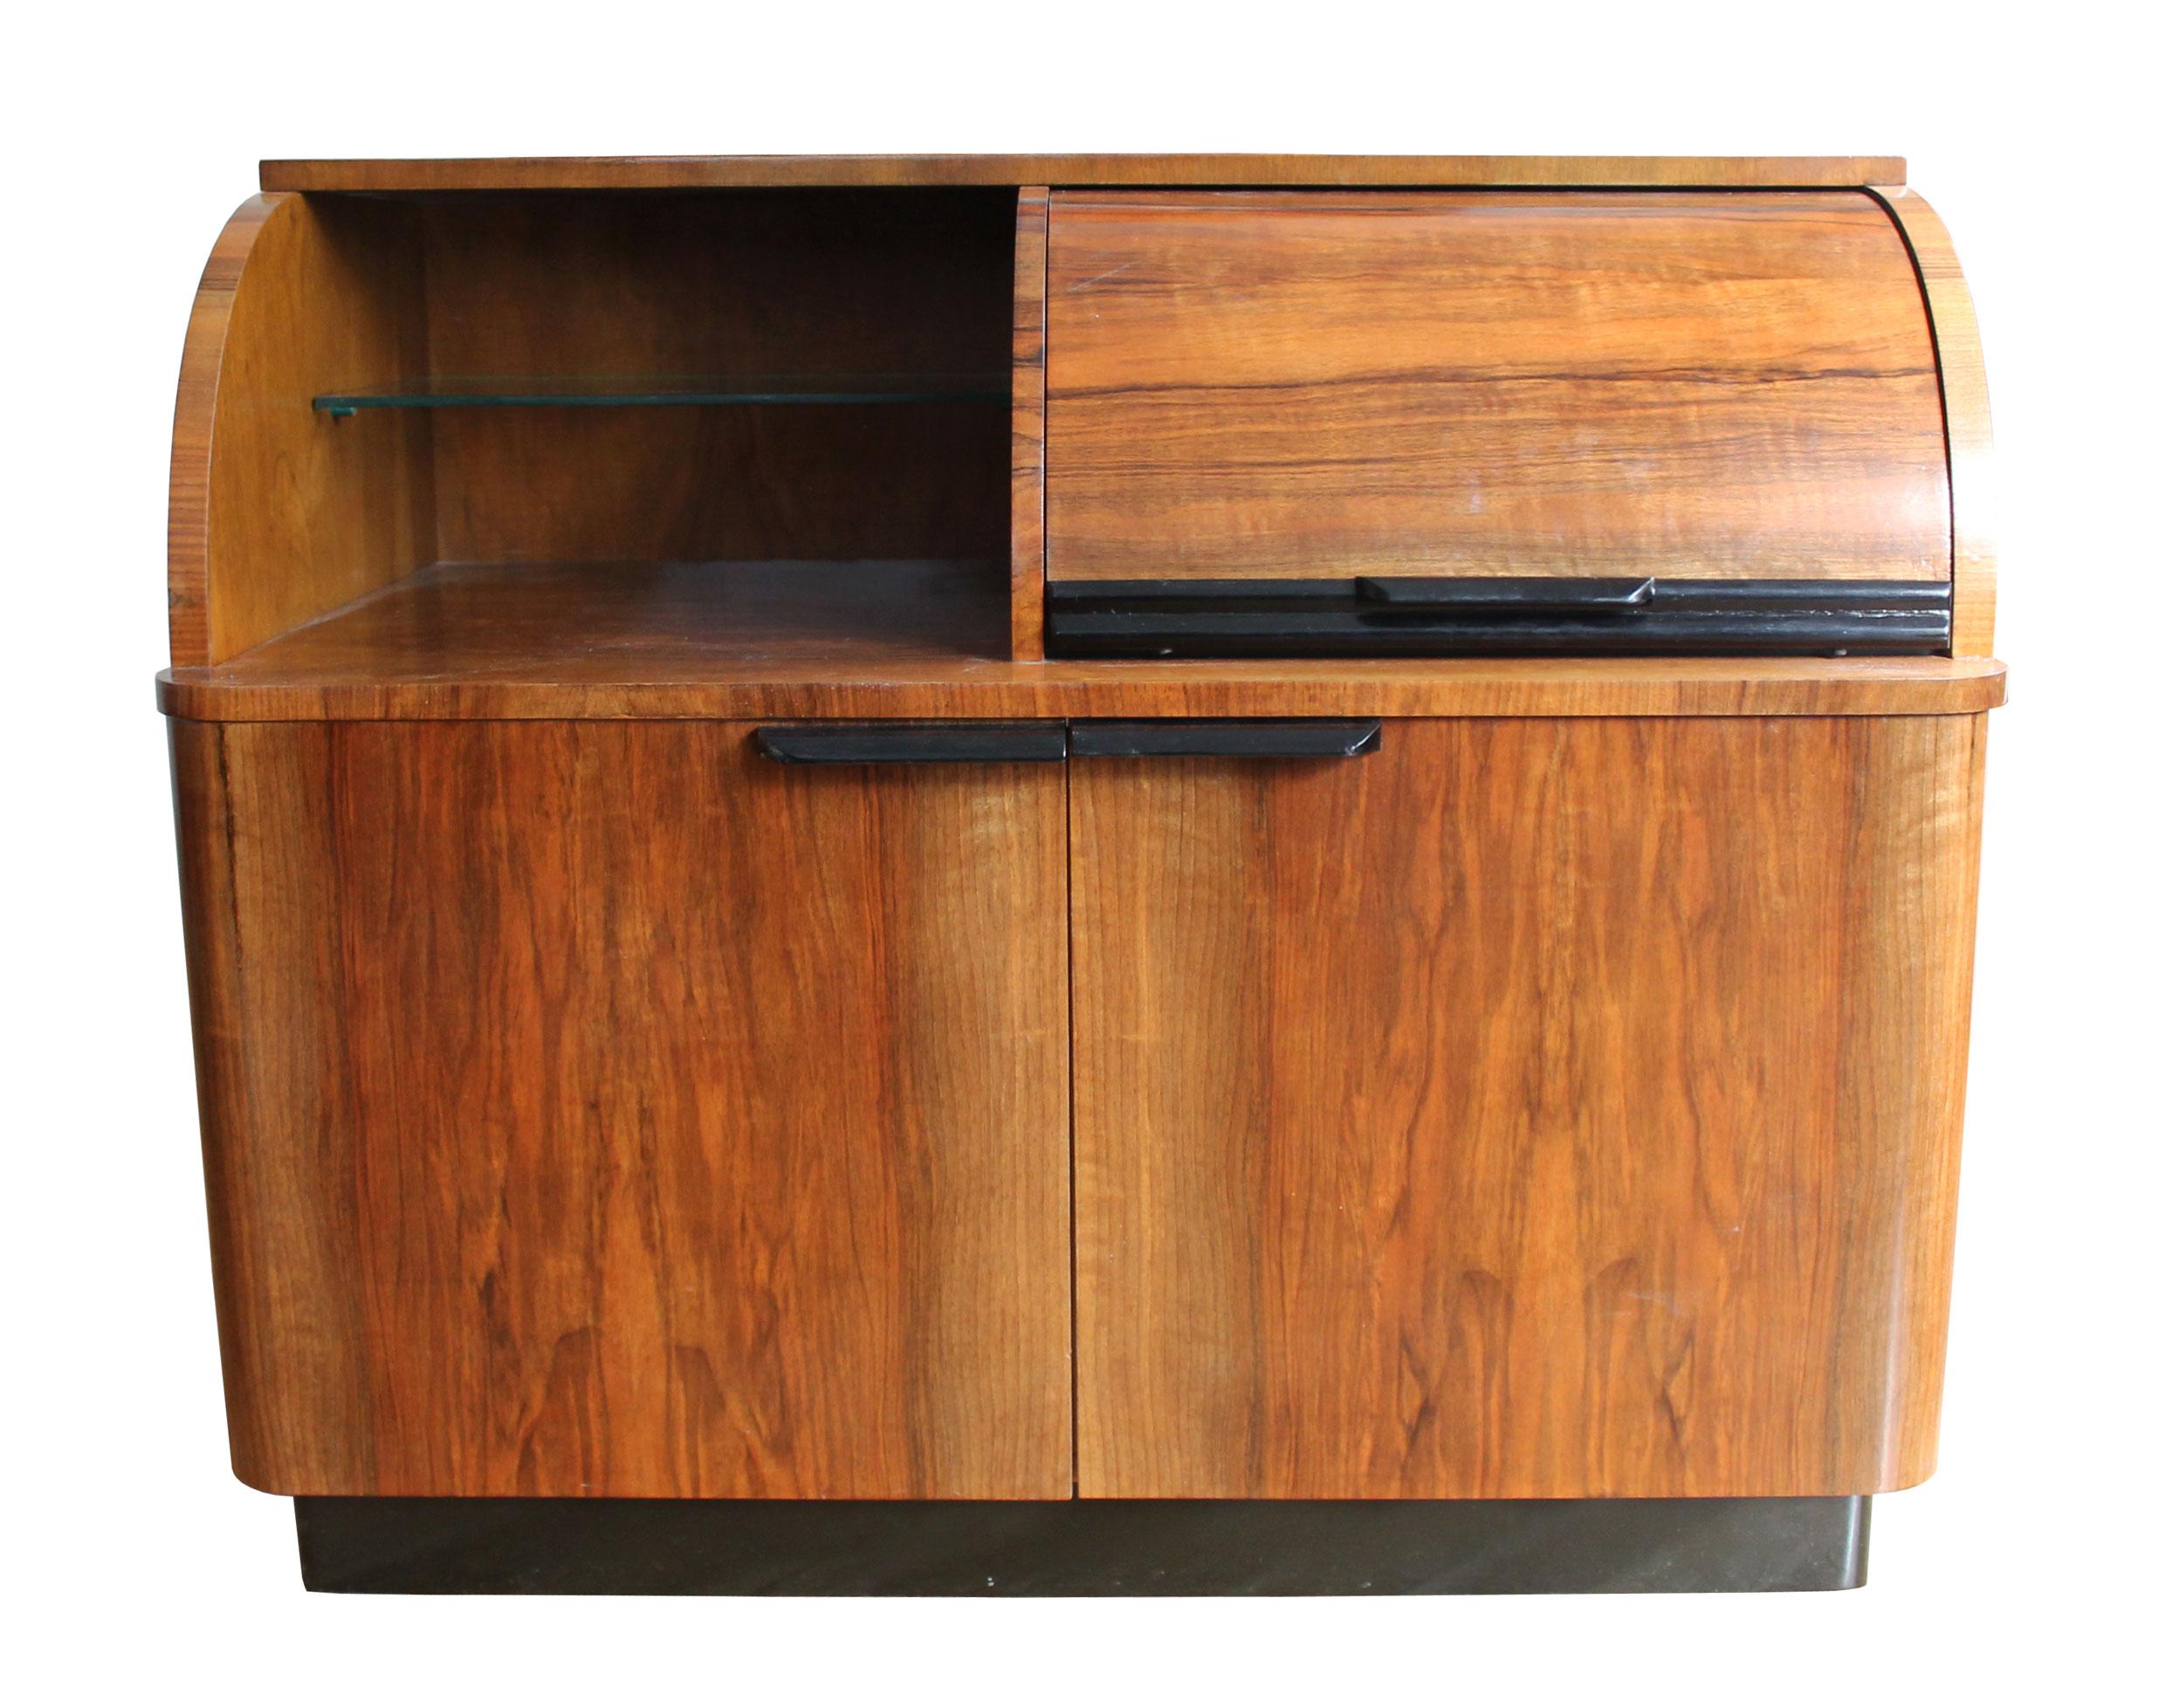 This cabinet was produced in Czechoslovakia in the 1960’s. Originally it was designed as a music cabinet to house a record player within the top right section of the piece, with records stored in the bottom left cupboard and magazines etc in the